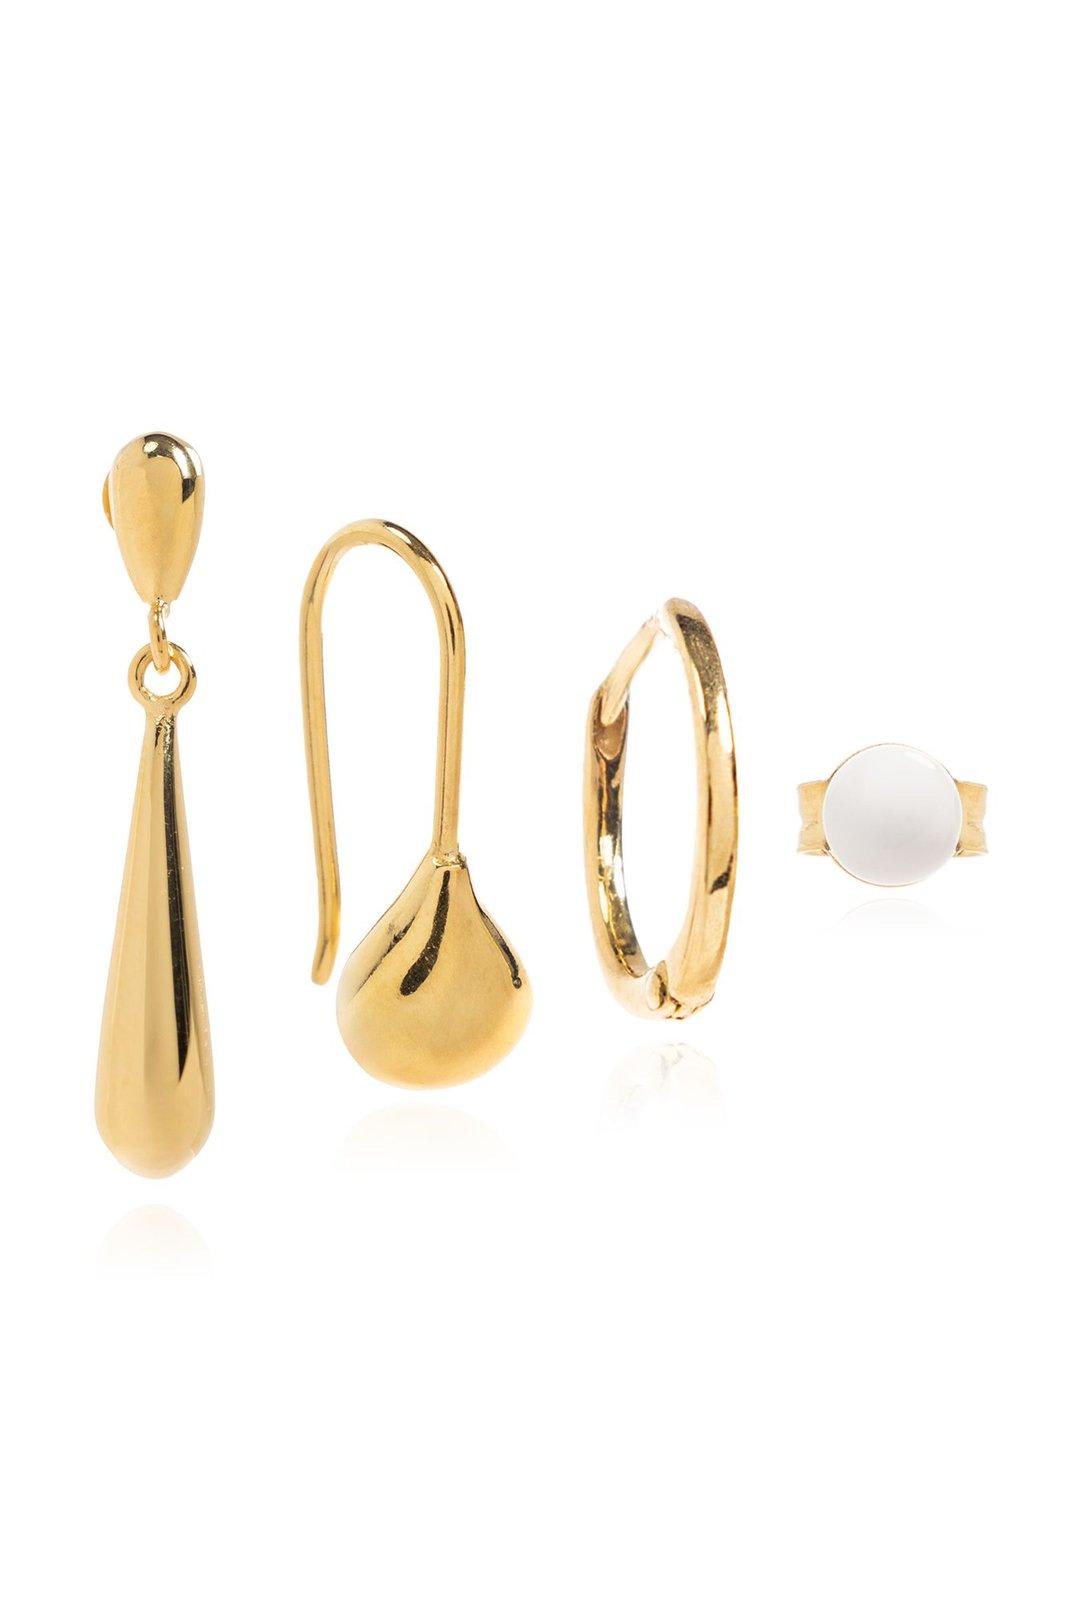 LEMAIRE SET OF FOUR EARRINGS